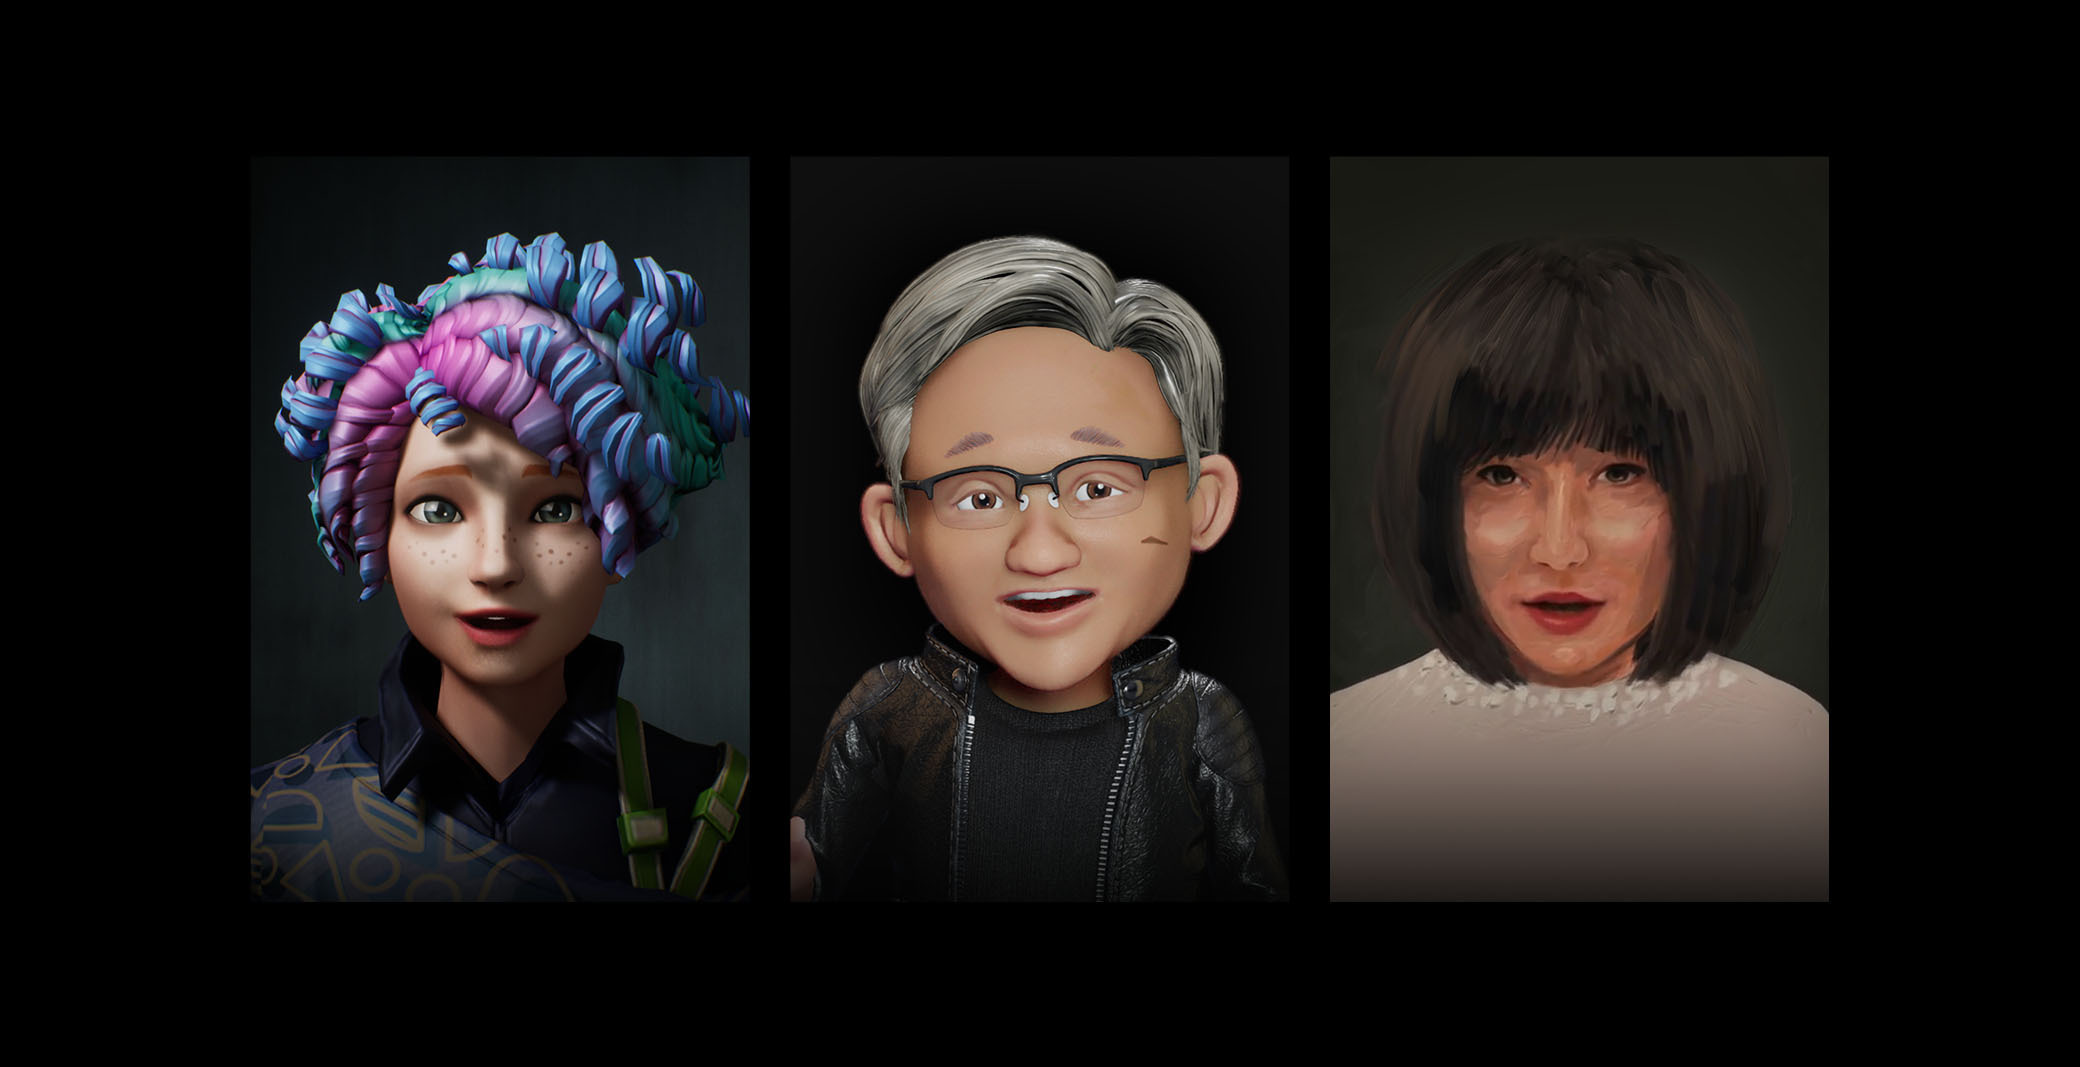 Experience interactive avatars in the cloud